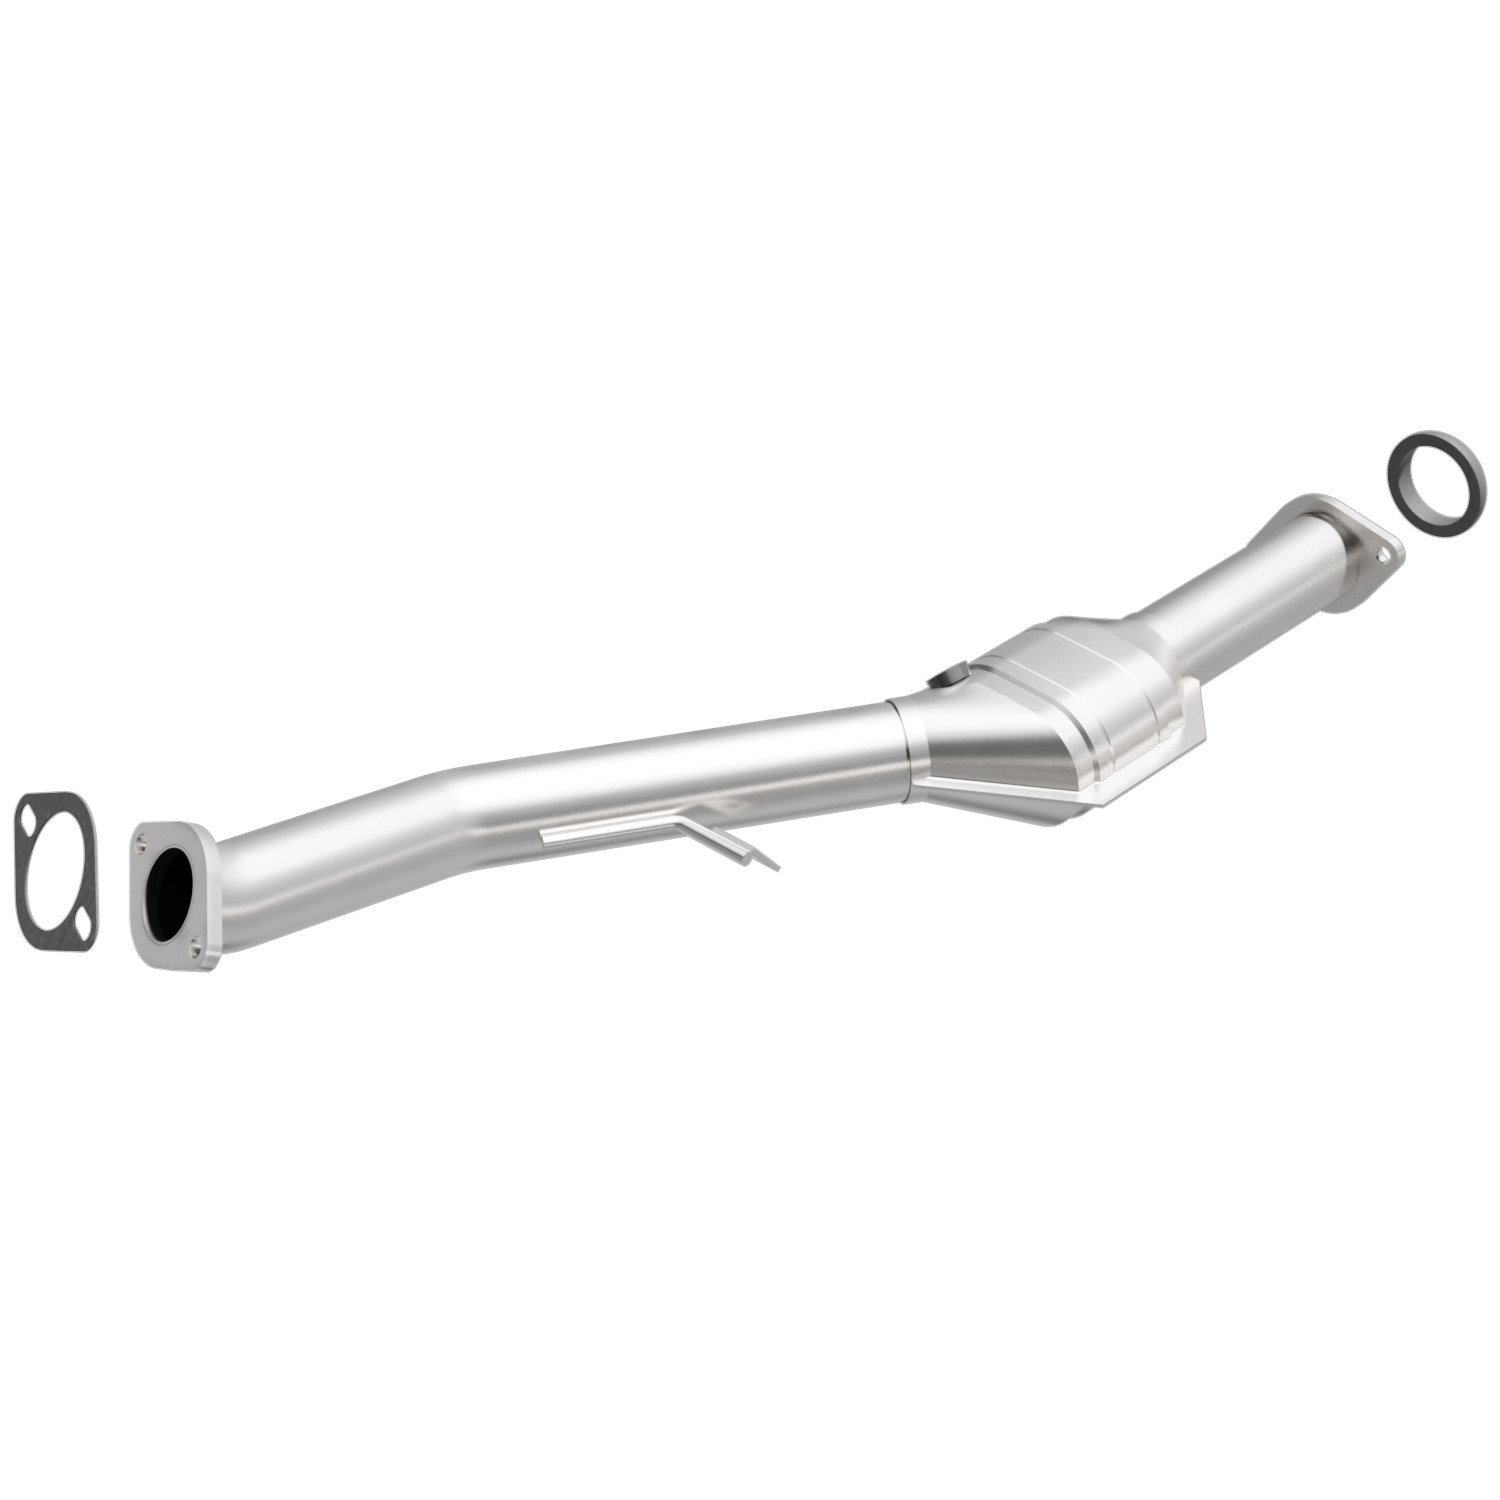 HM Grade Federal / EPA Compliant Direct-Fit Catalytic Converter 24827